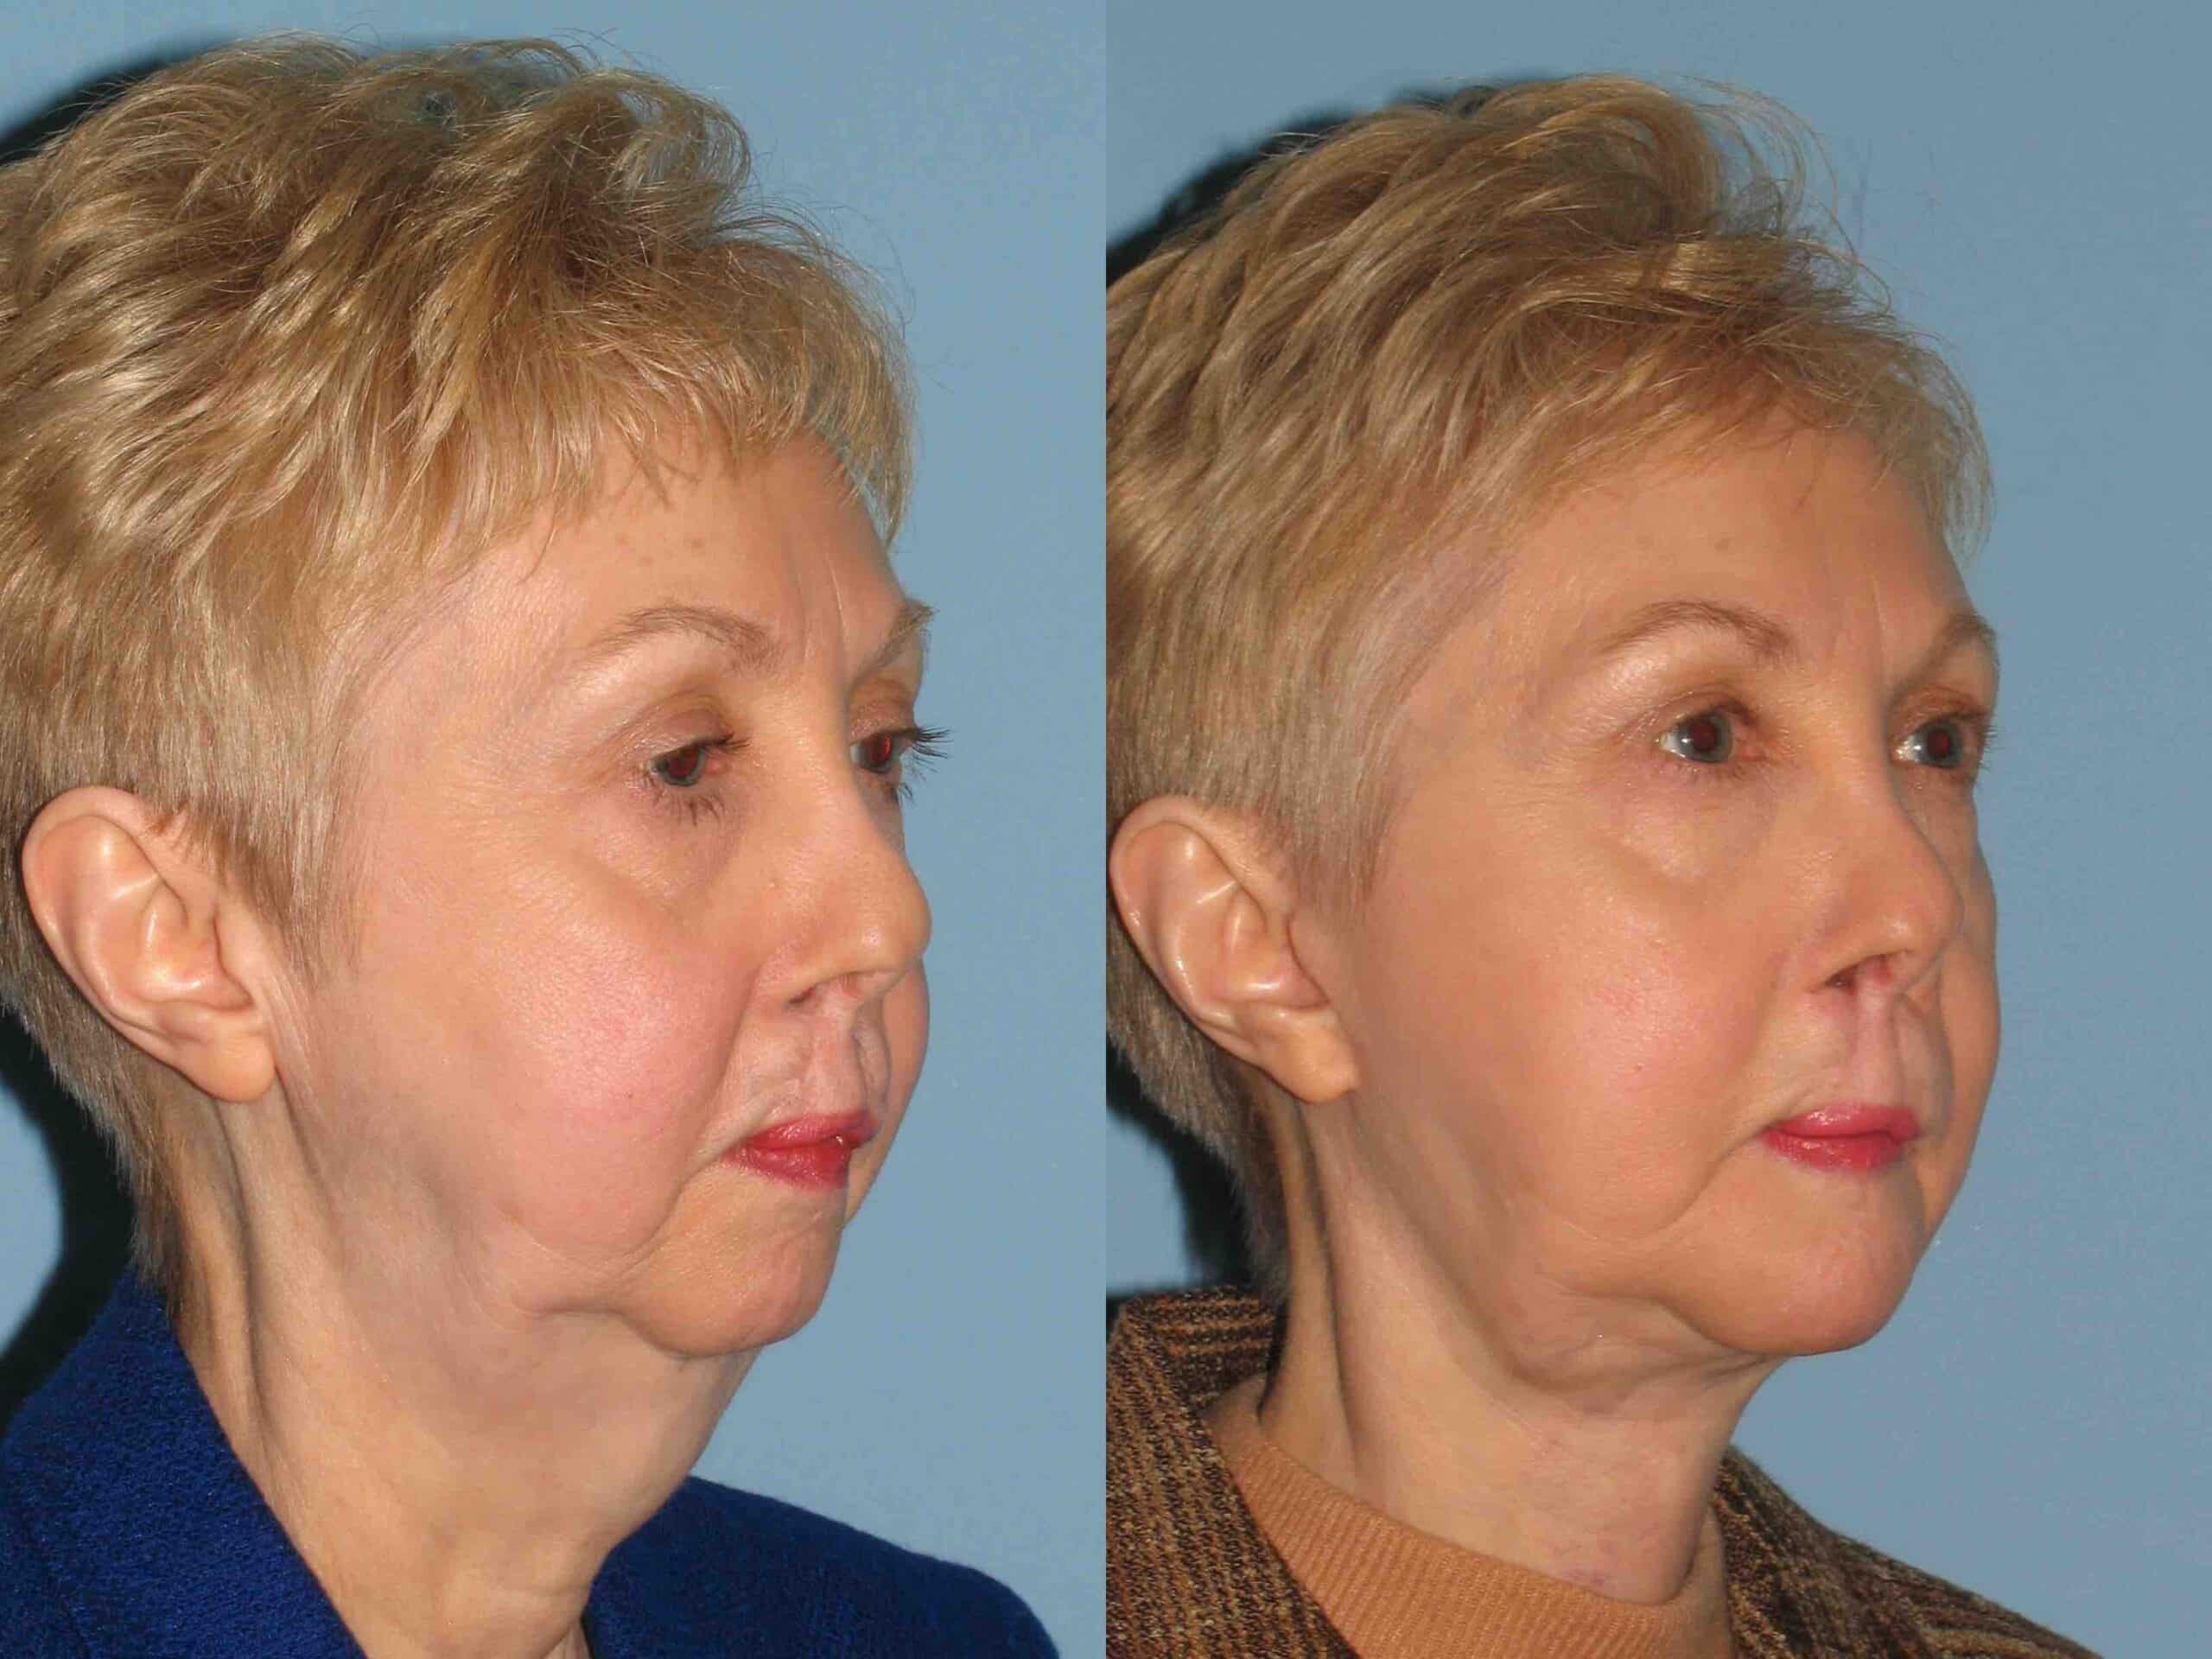 Before and after, patient 1 yr post op after Neck Lift, Facelift, VASER neck, Scar Revision Nose & Cleft Lip, Chin Augmentation w/Implant – Genioplasty procedures performed by Dr. Paul Vanek